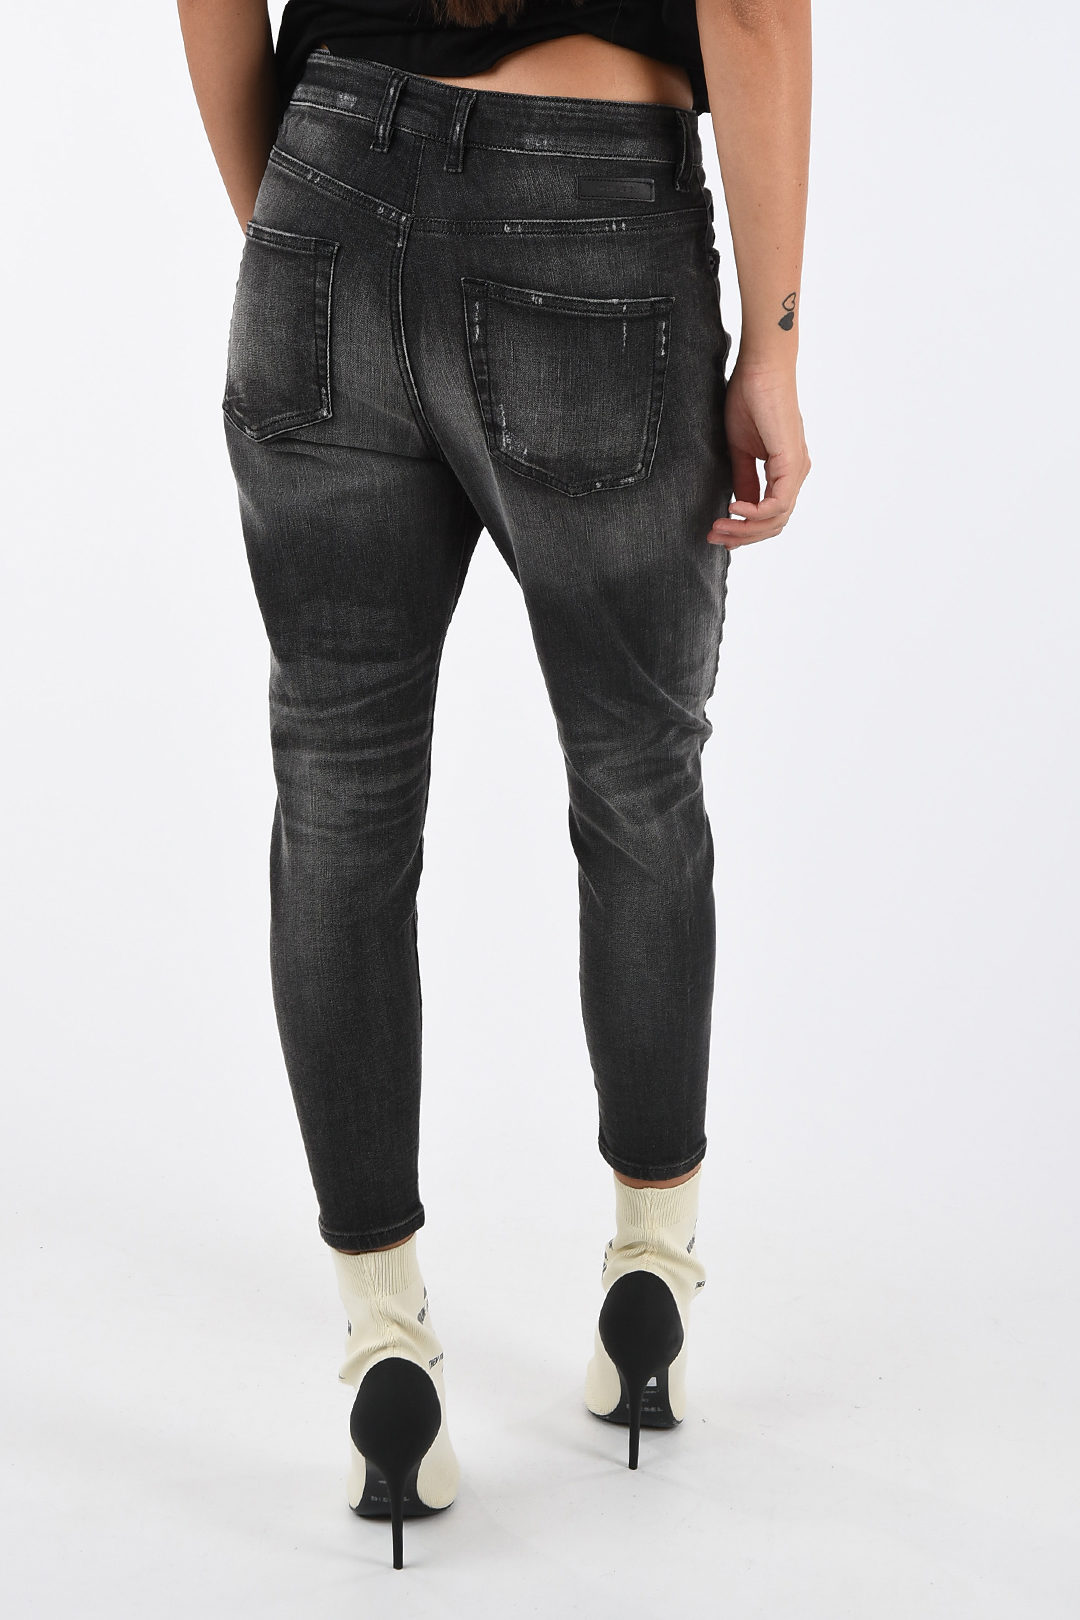 Gelovige Groenland sieraden Diesel Stone Washed CANDYS-T Jogg Jeans women - Glamood Outlet